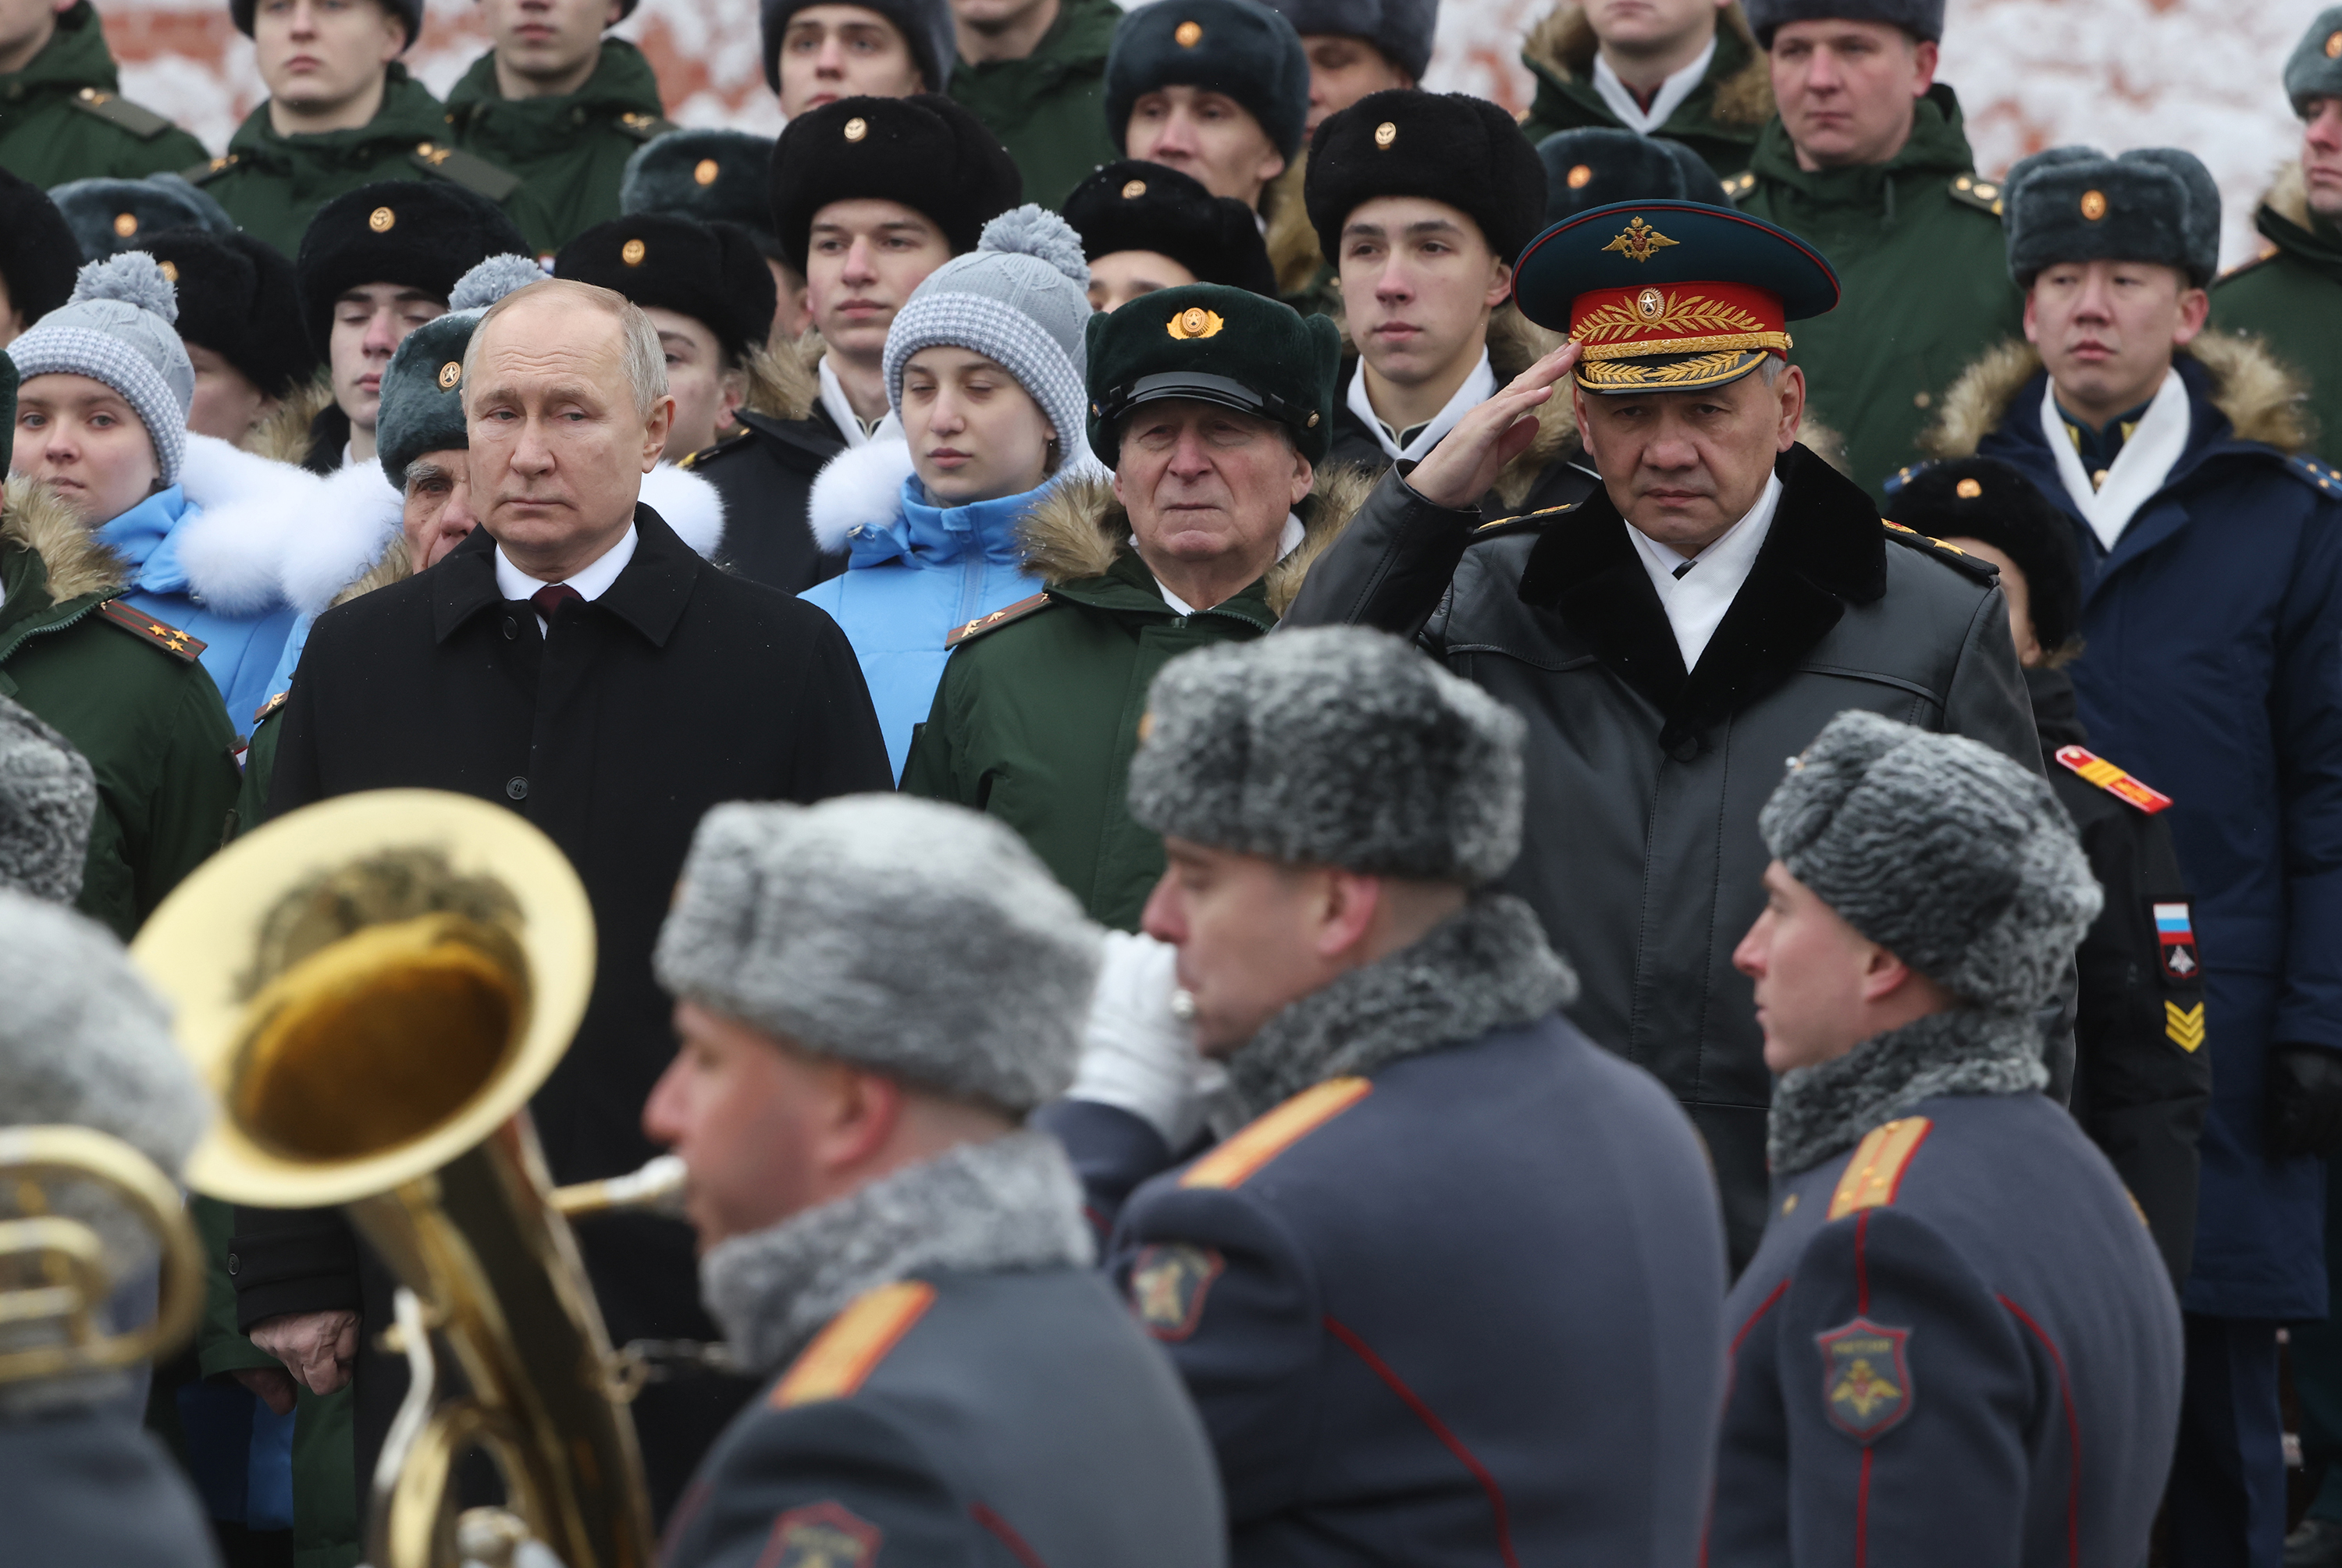 Russian President Vladimir Putin (L) and Defense Minister Sergei Shoigu (R) look on while taking part in the wreath laying ceremony at the Unknown Soldier Tomb, marking the Defender of the Fatherland's Day, on February 23, in Moscow, Russia.